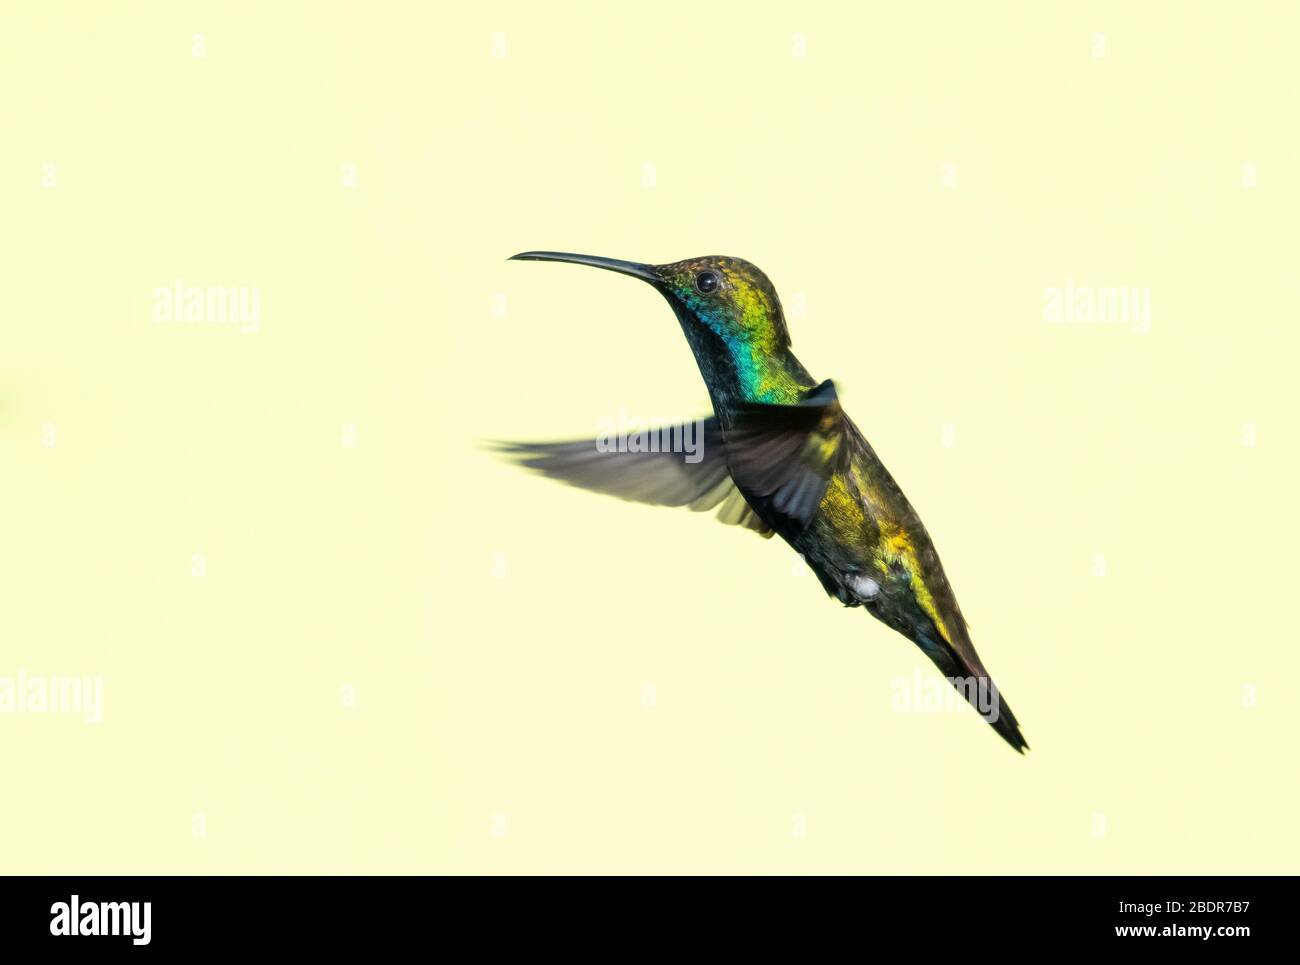 A Black-throated Mango hummingbird hovering in the air with a blurred background. Stock Photo